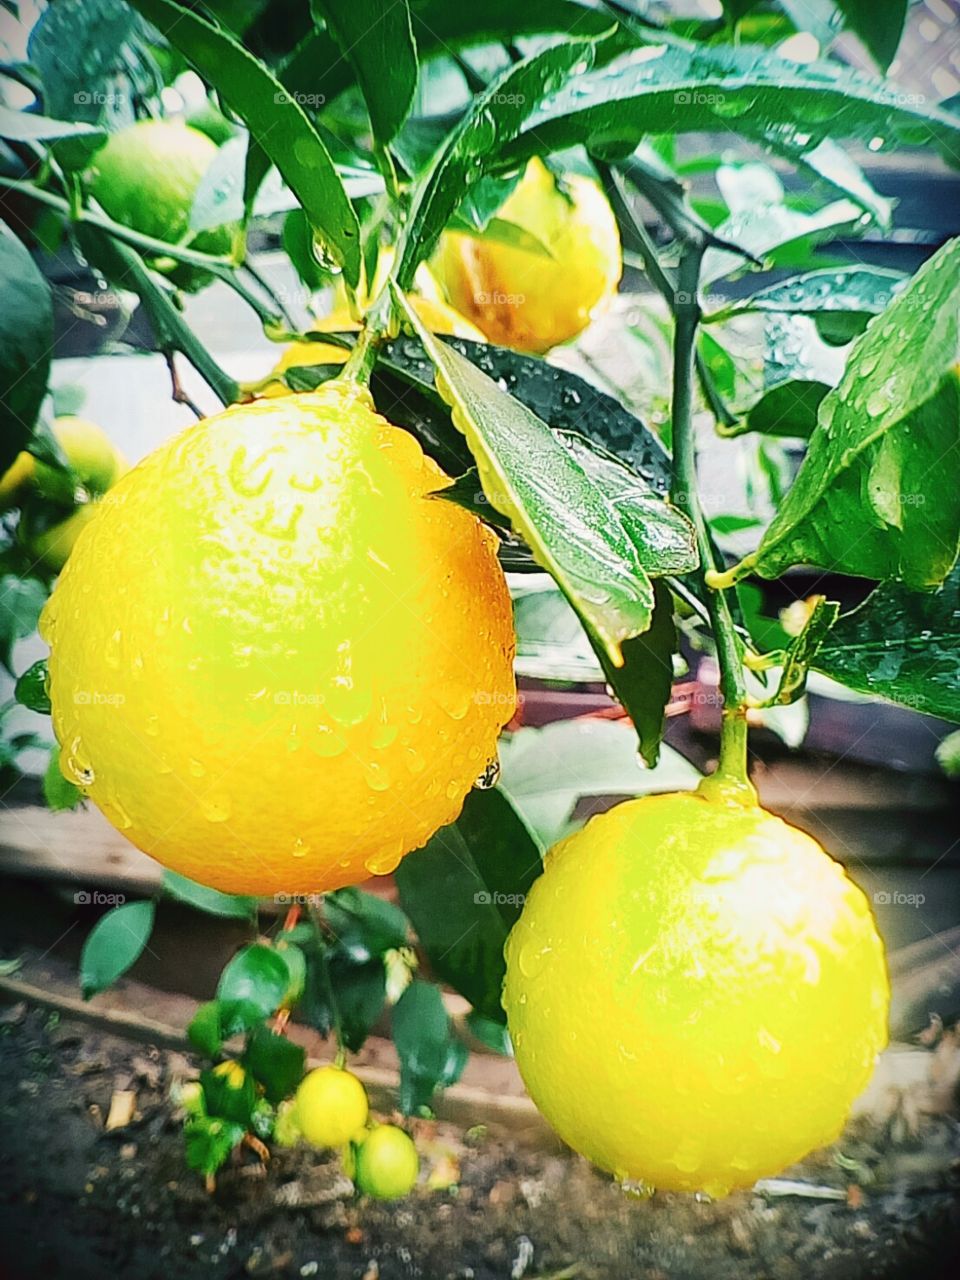 Bright Yellow Lemons, ready to be picked after the Storm. ♡